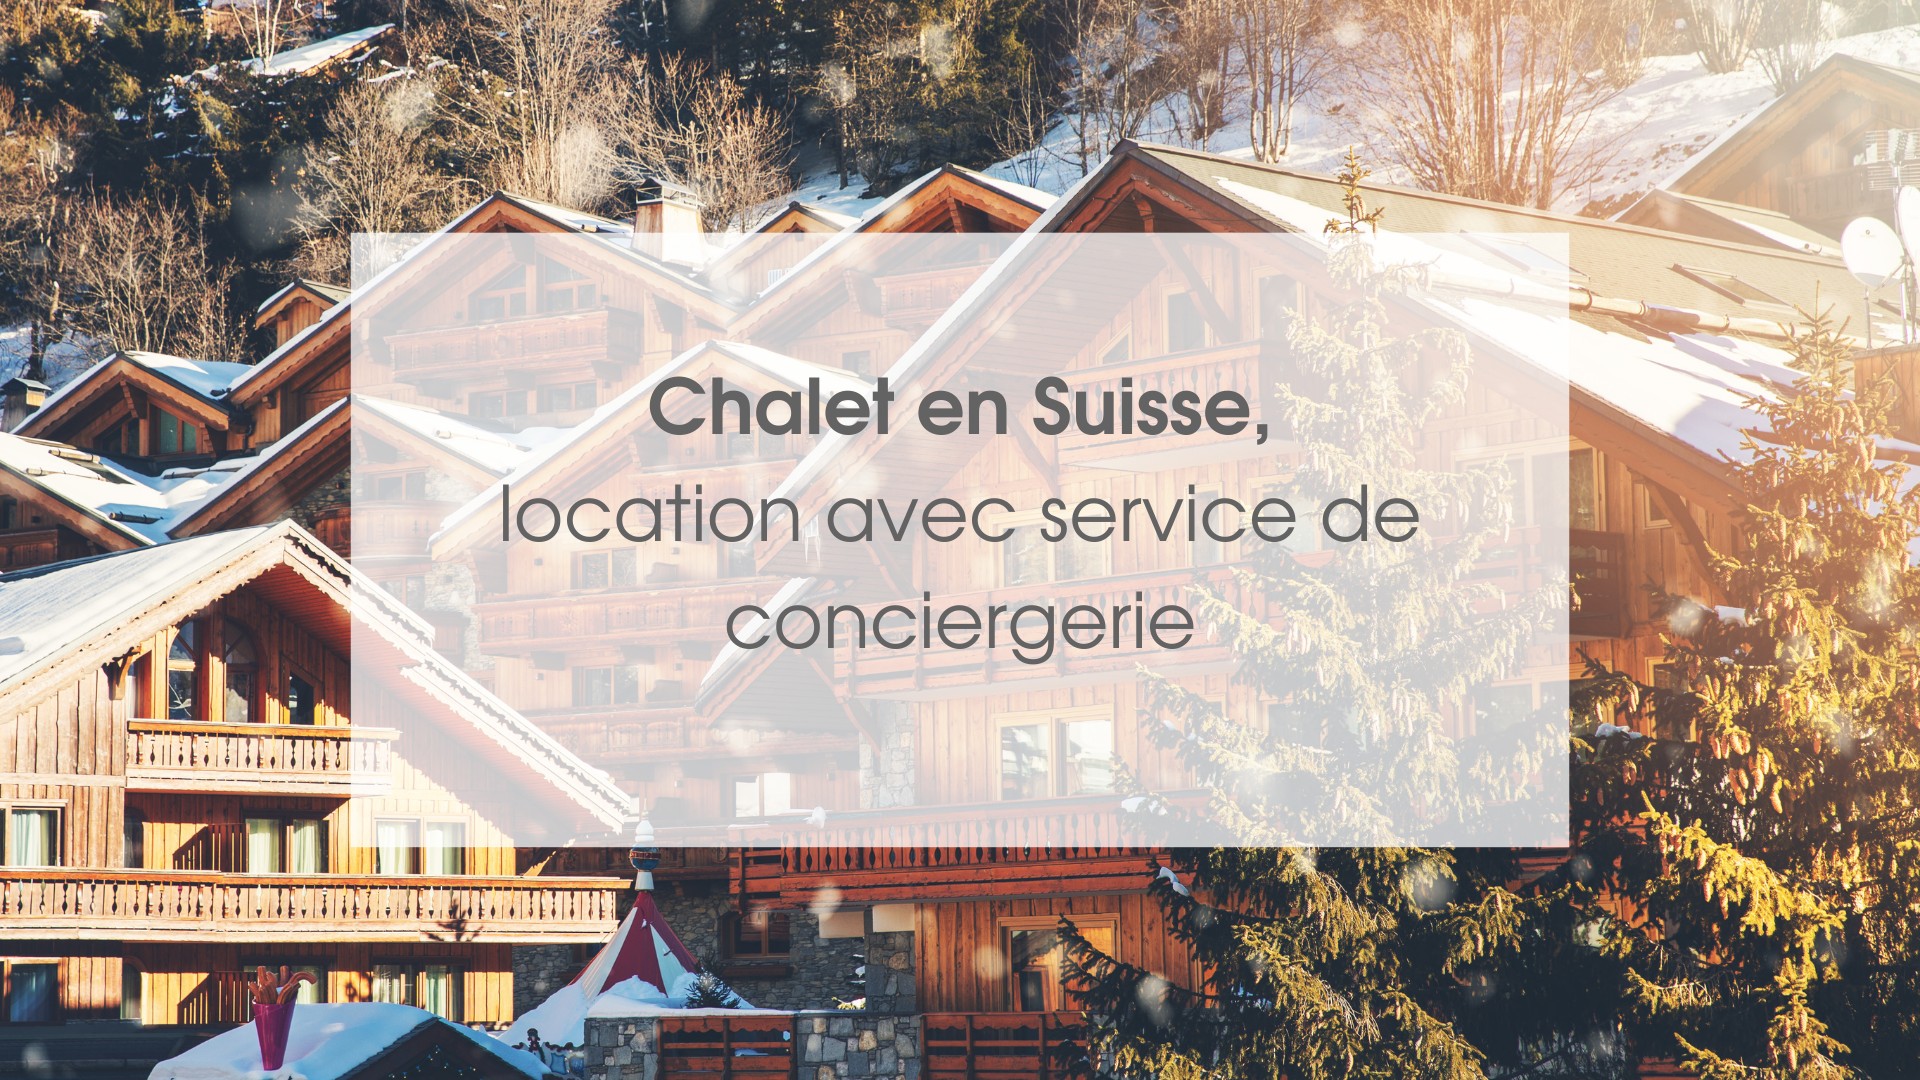 Chalet in SUISSE, rental with concierge service